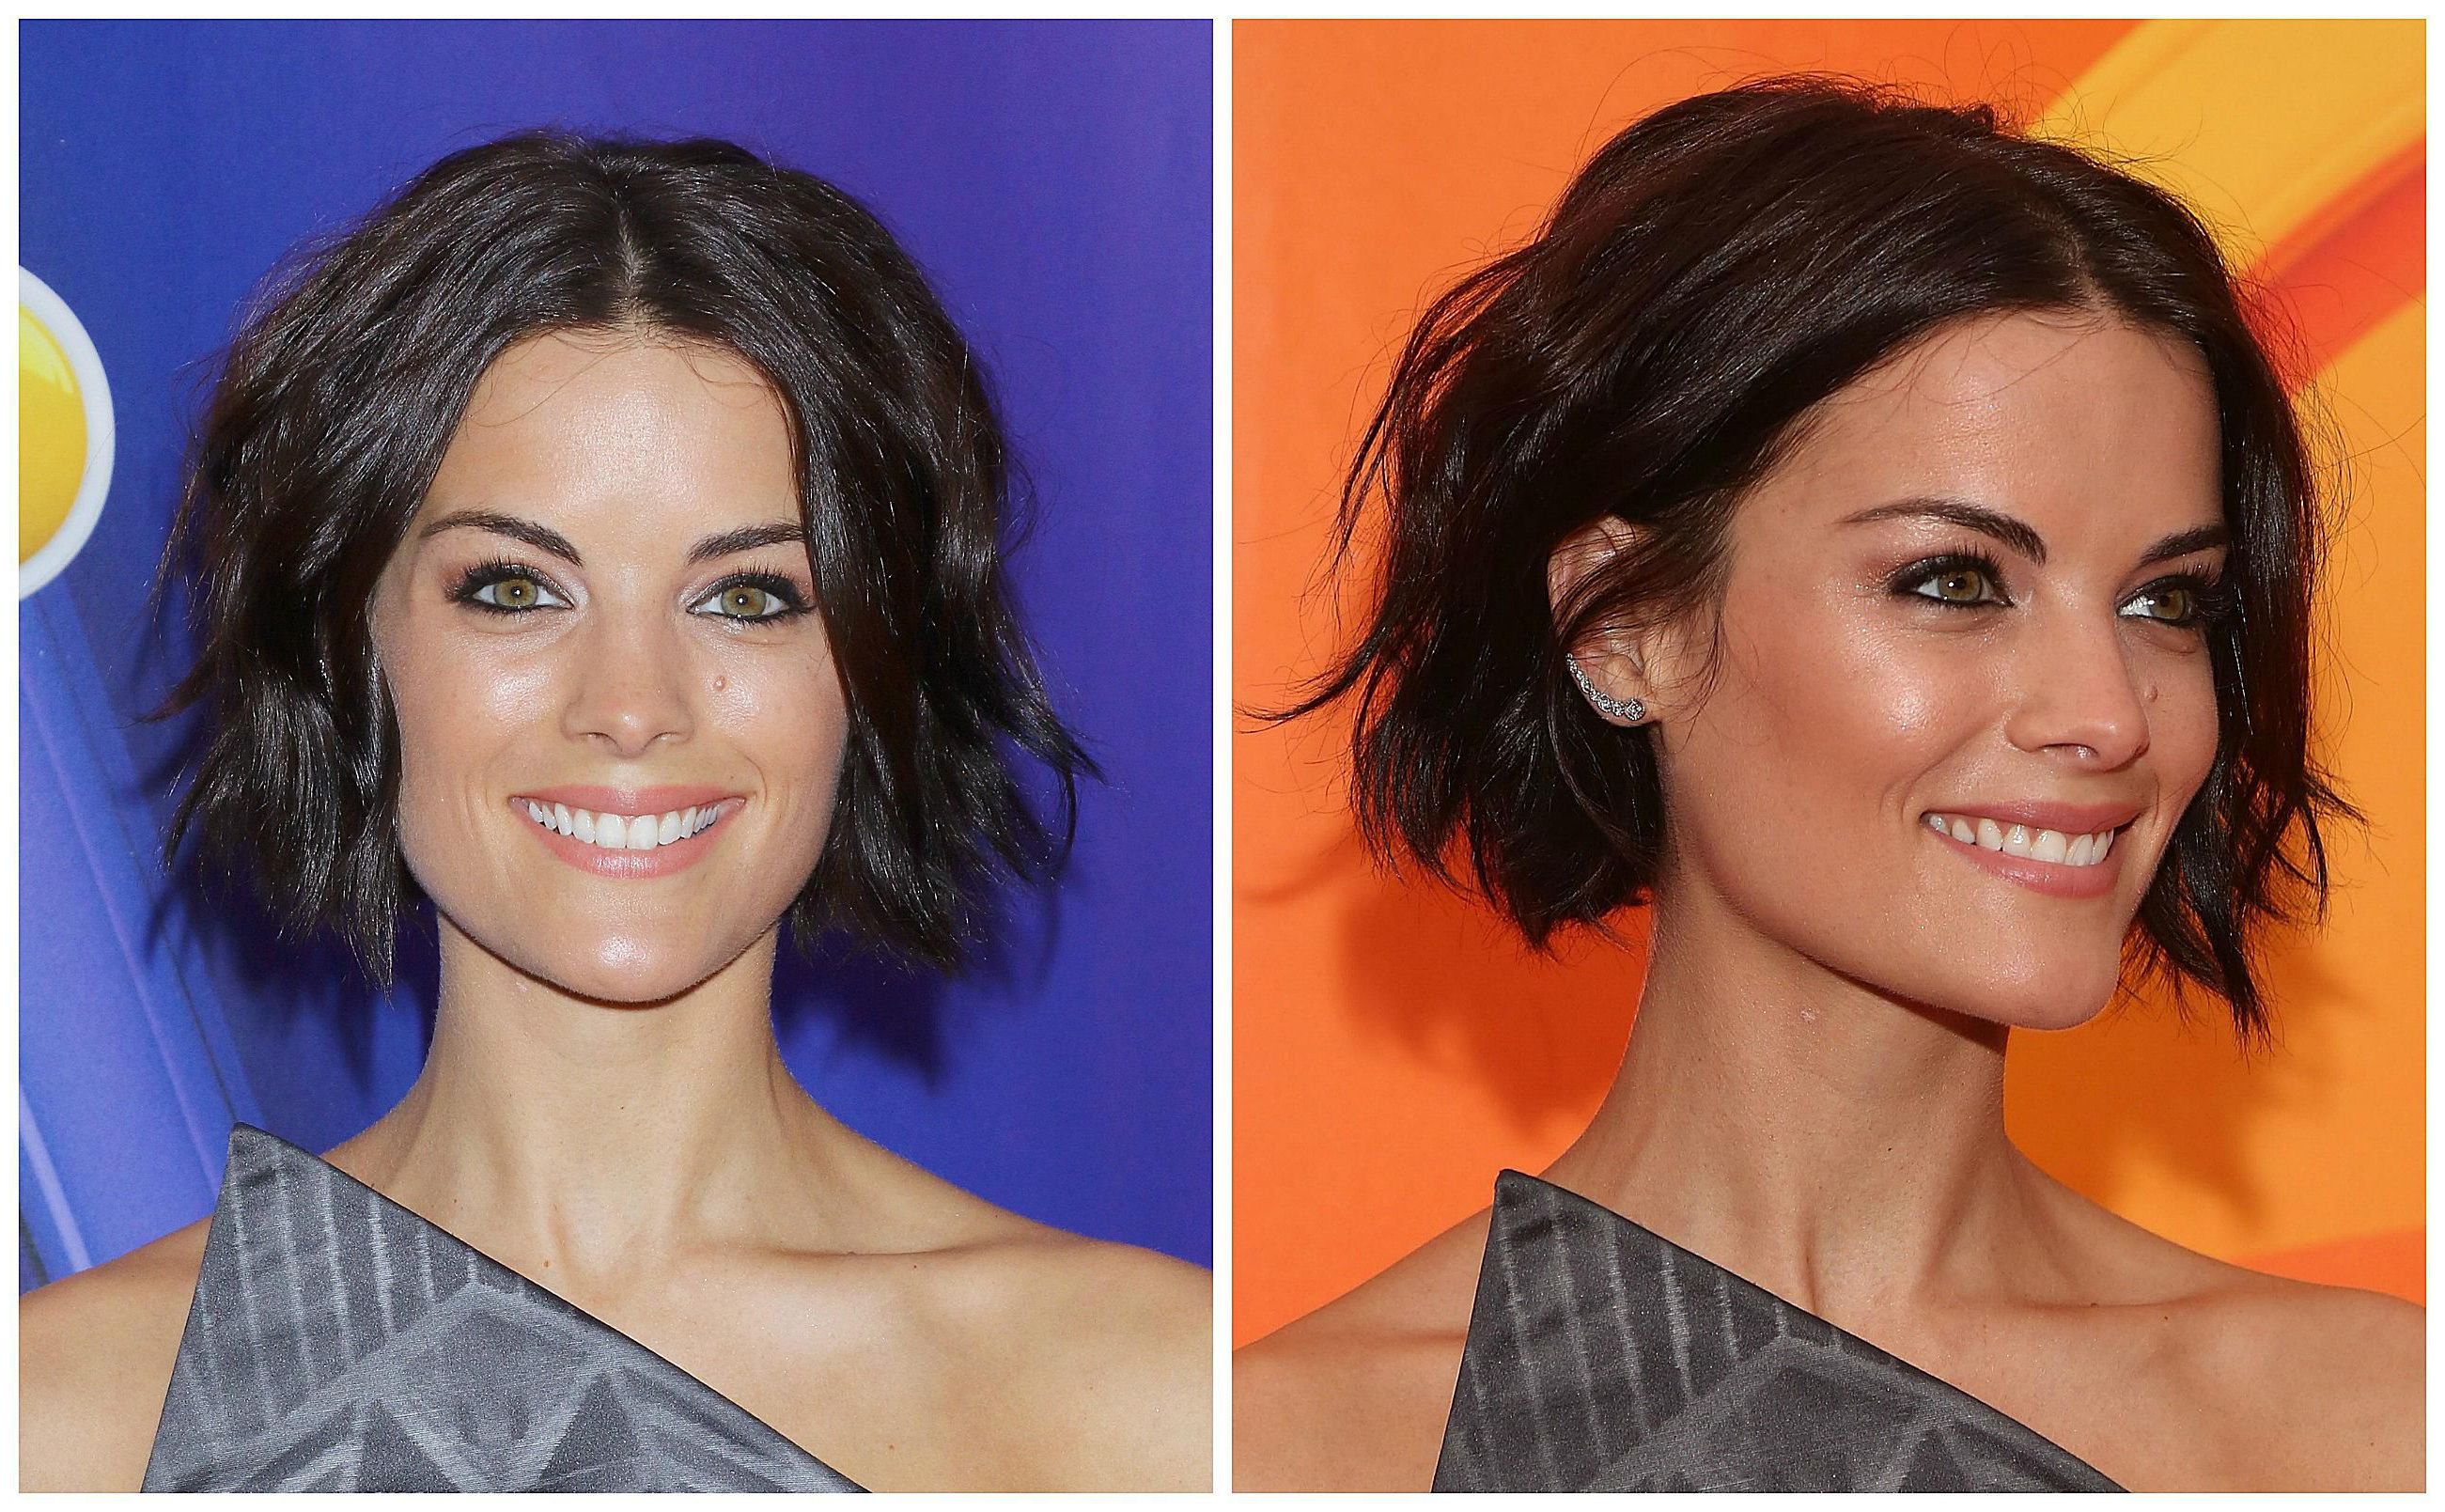 How To Tell If You'd Look Good In Short Hair Throughout Short Hairstyles That Make You Look Younger (View 12 of 25)